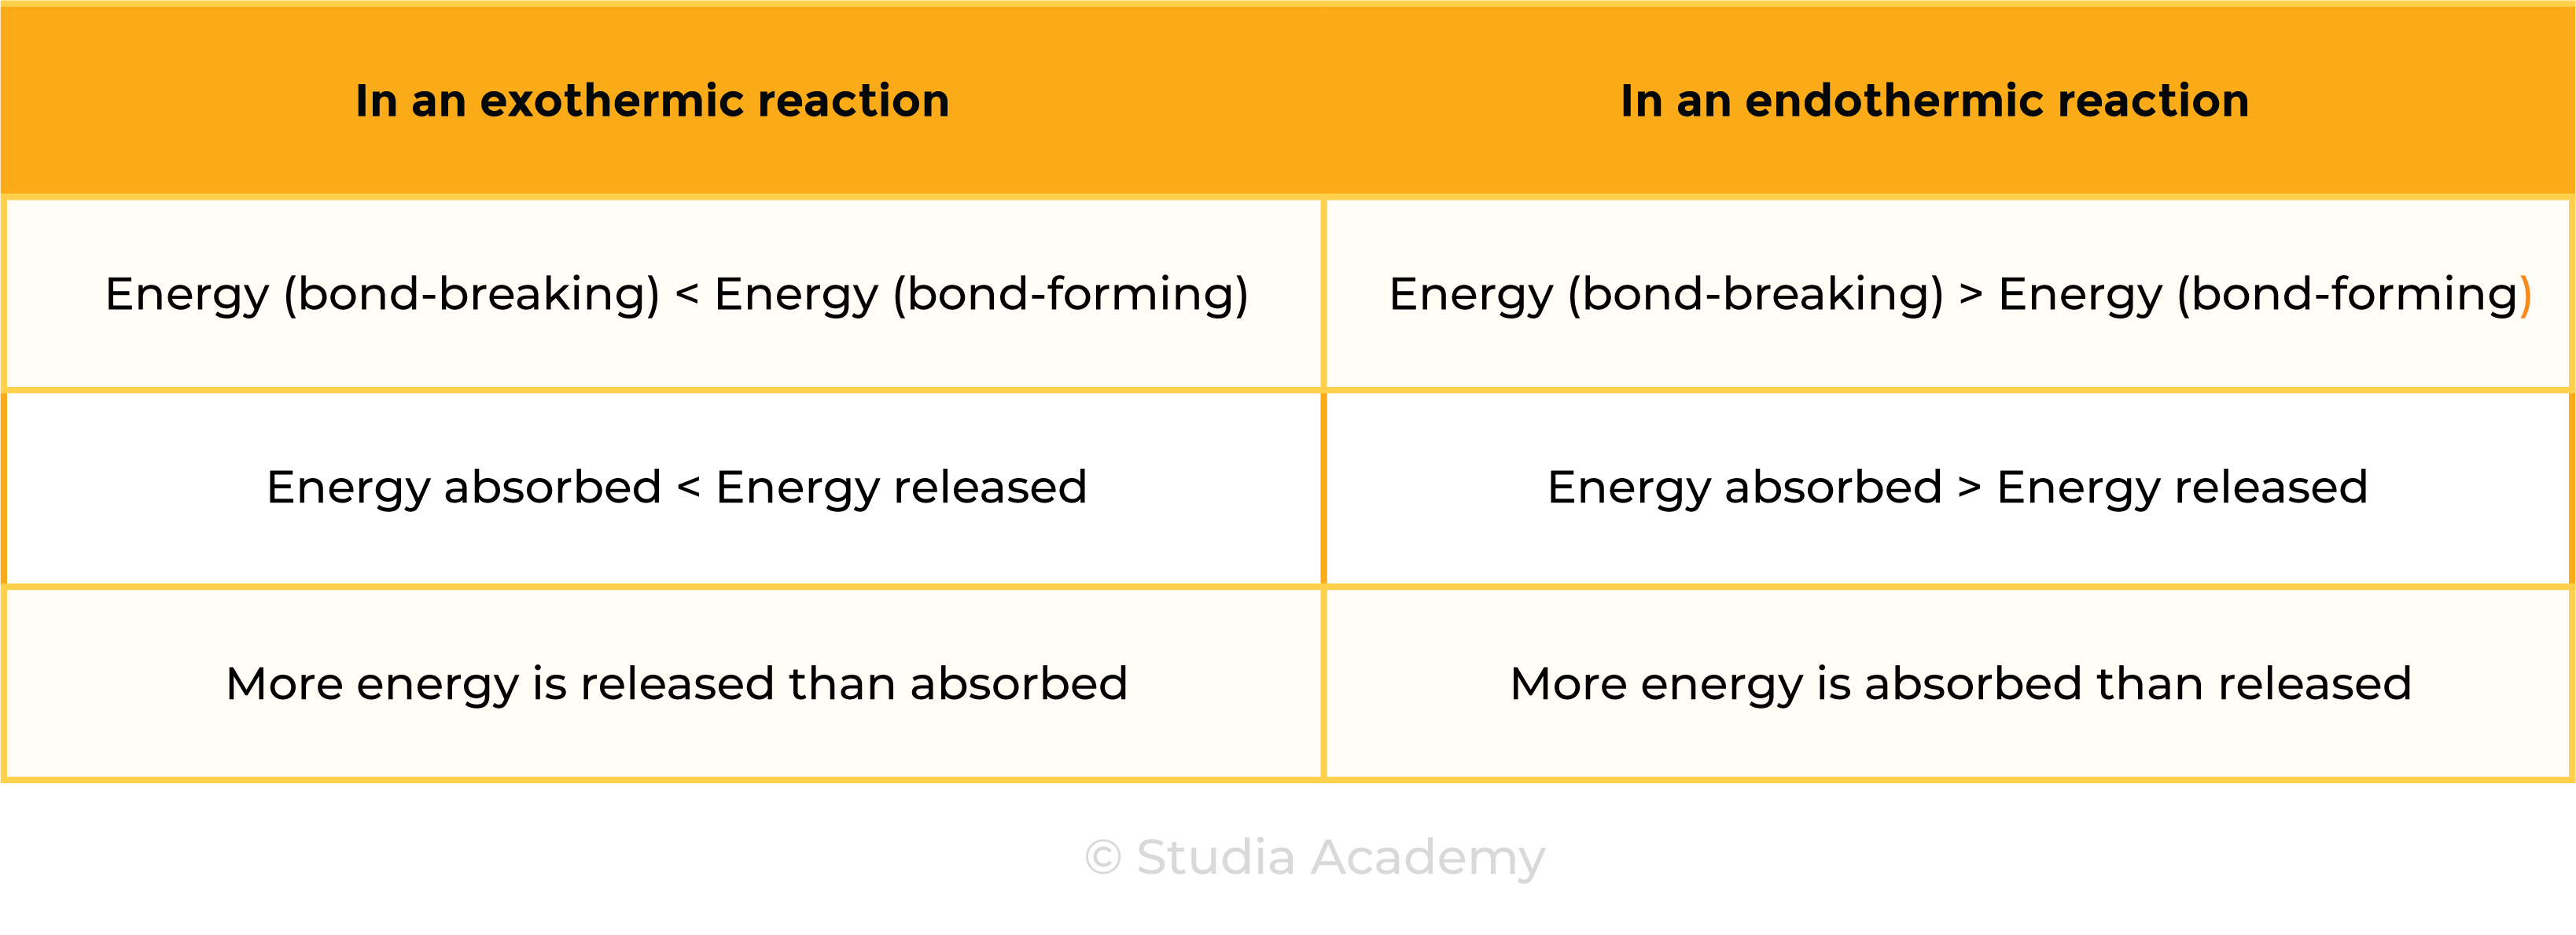 edexcel_igcse_chemistry_topic 18 tables_energetics_004_exothermic and endothermic energy absorbed and released